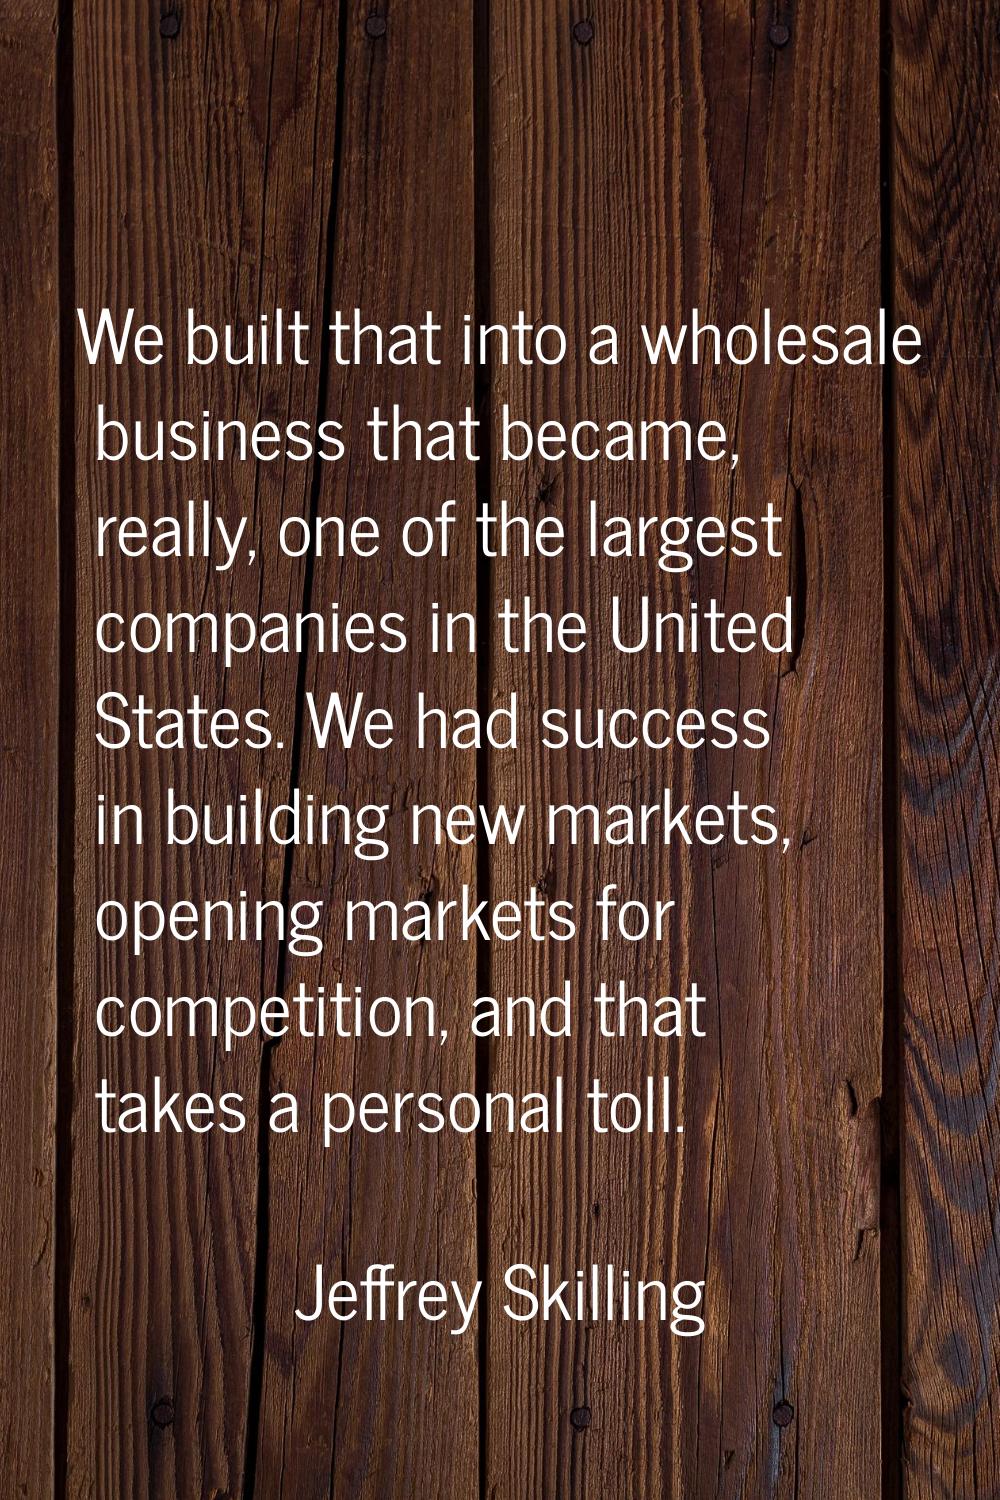 We built that into a wholesale business that became, really, one of the largest companies in the Un